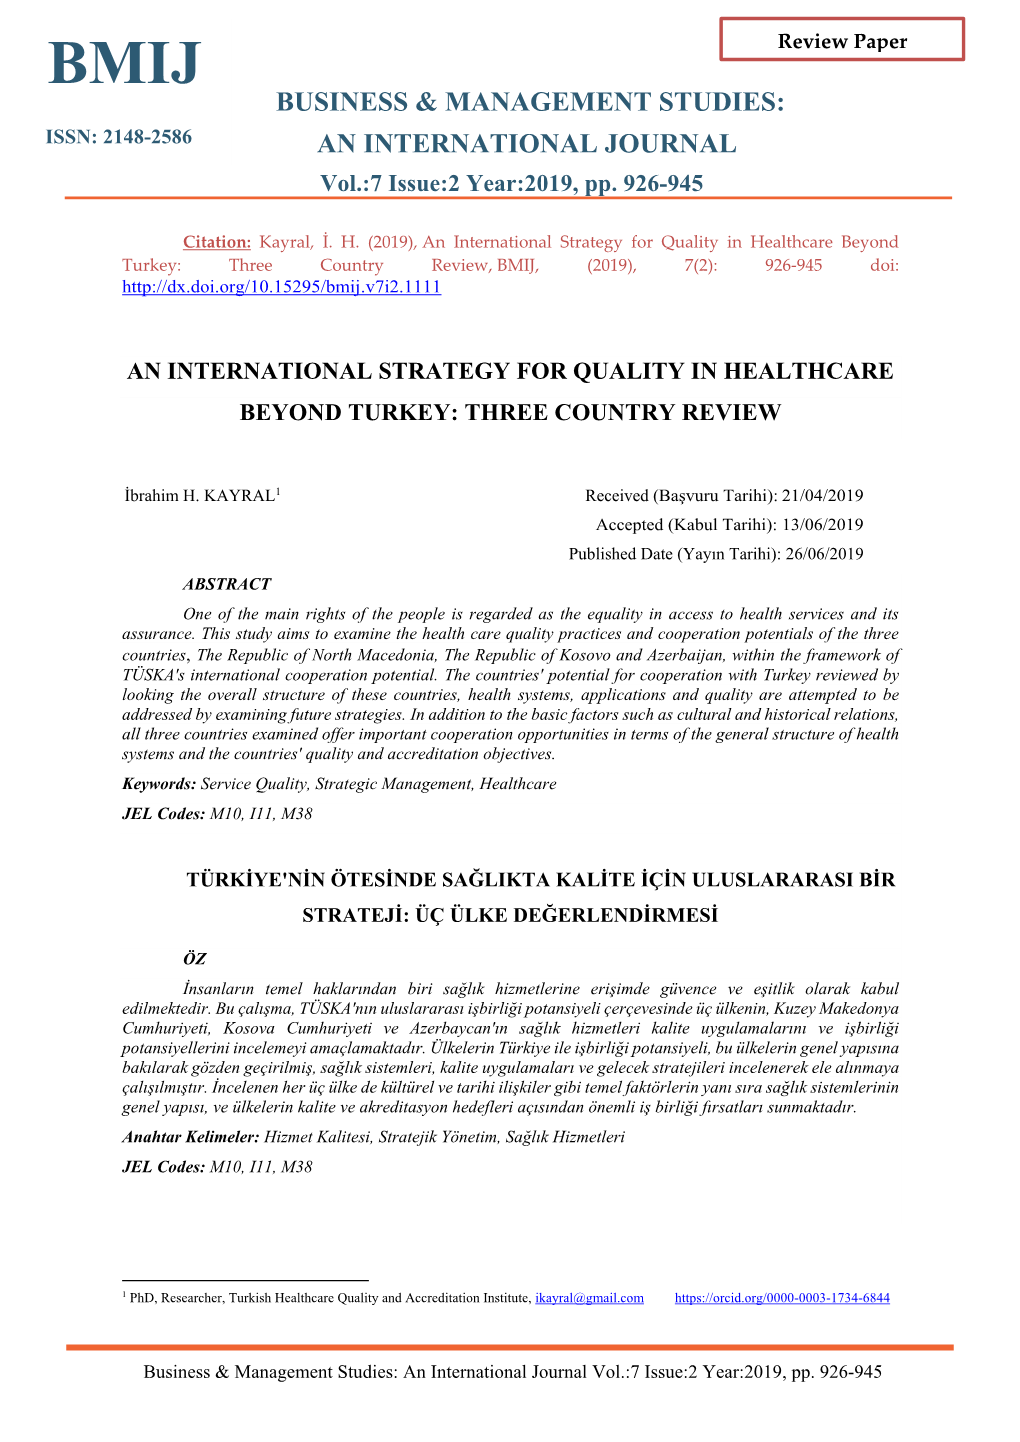 An International Strategy for Quality in Healthcare Beyond Turkey: Three Country Review, BMIJ, (2019), 7(2): 926-945 Doi